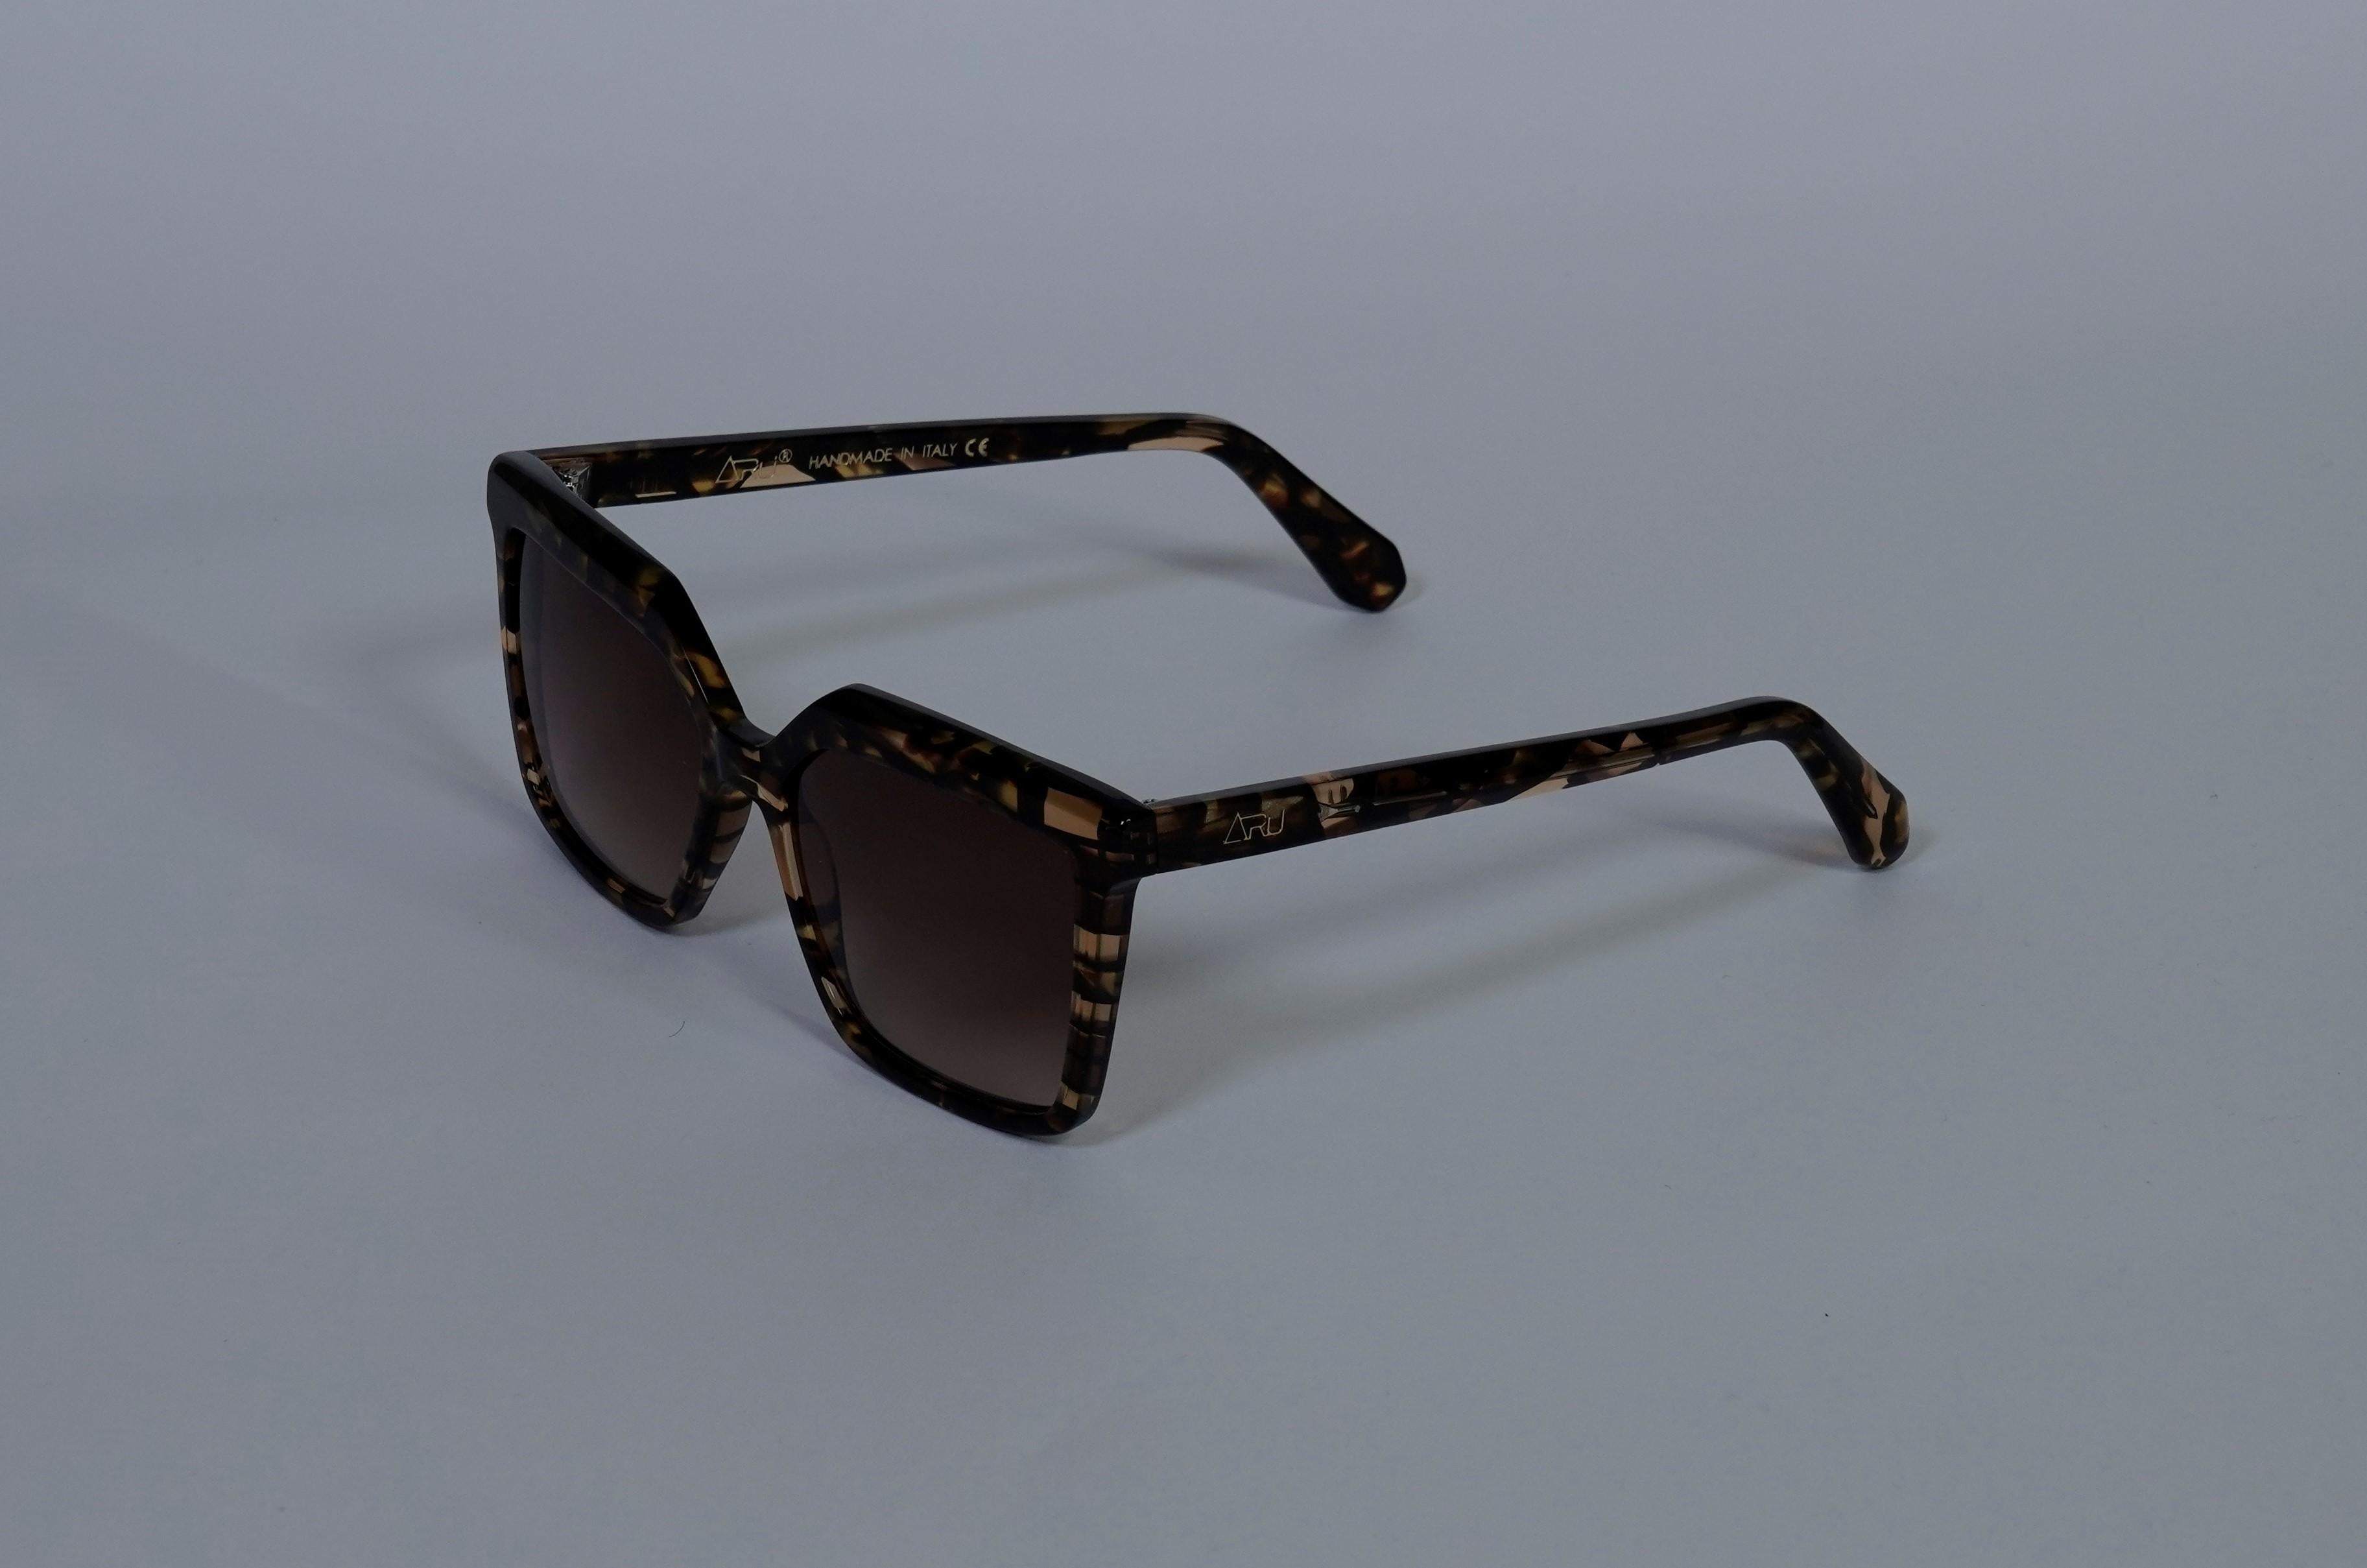 Aru Eyewear brown sunglasses
Model born for women with a vintage shape, entirely in acetate and timeless.
totally made in italy